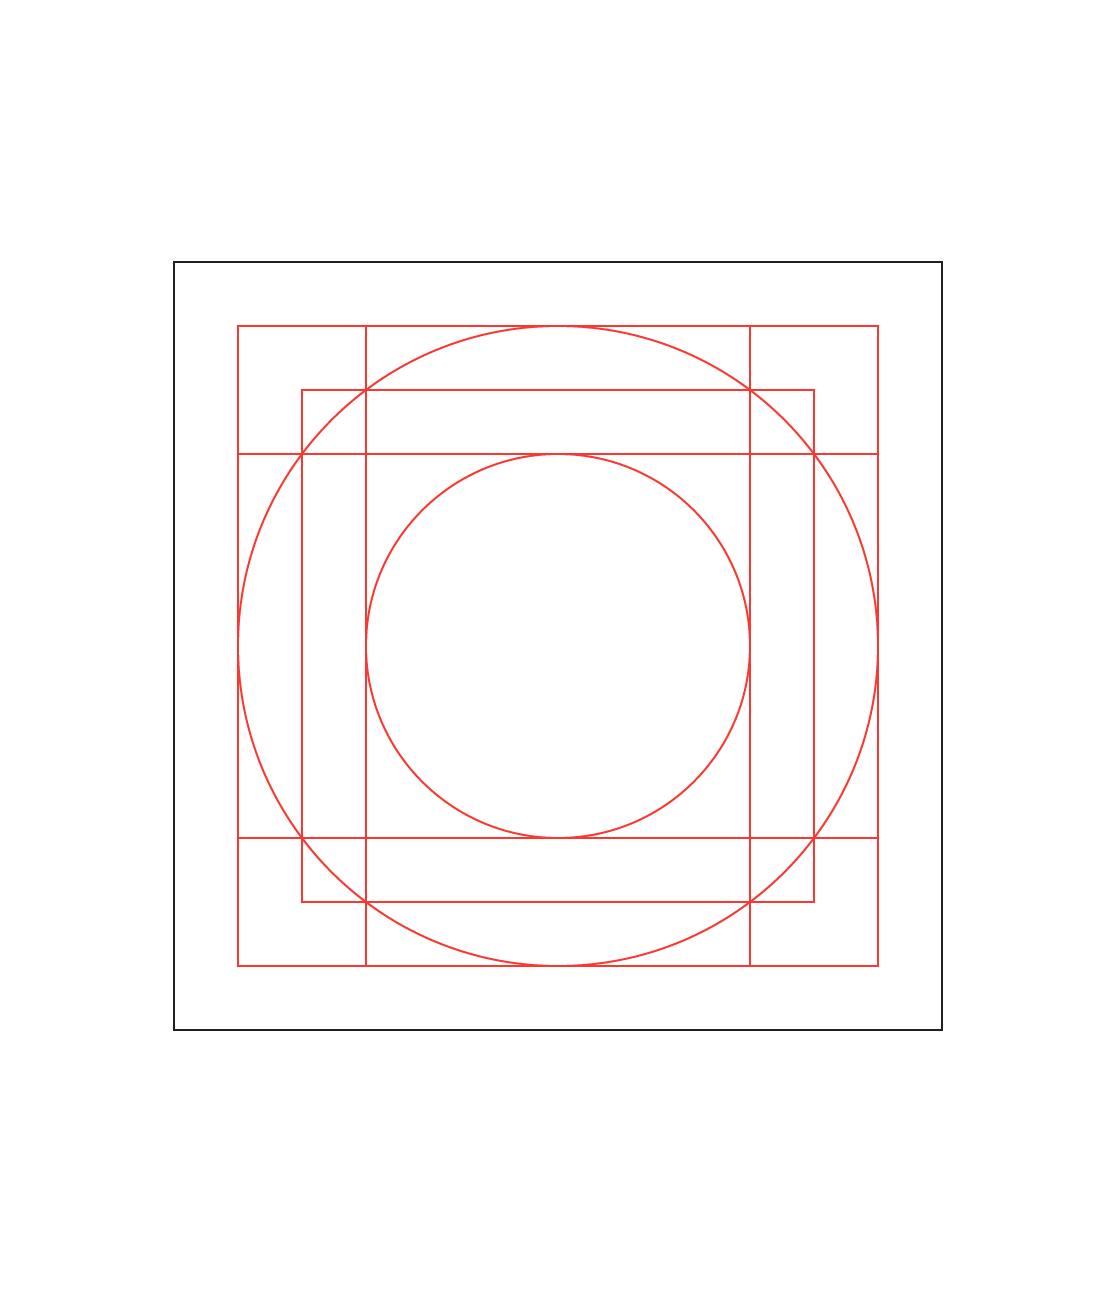 A box with the same dimensions as the grids above is rendered containing concentric circles and squares.